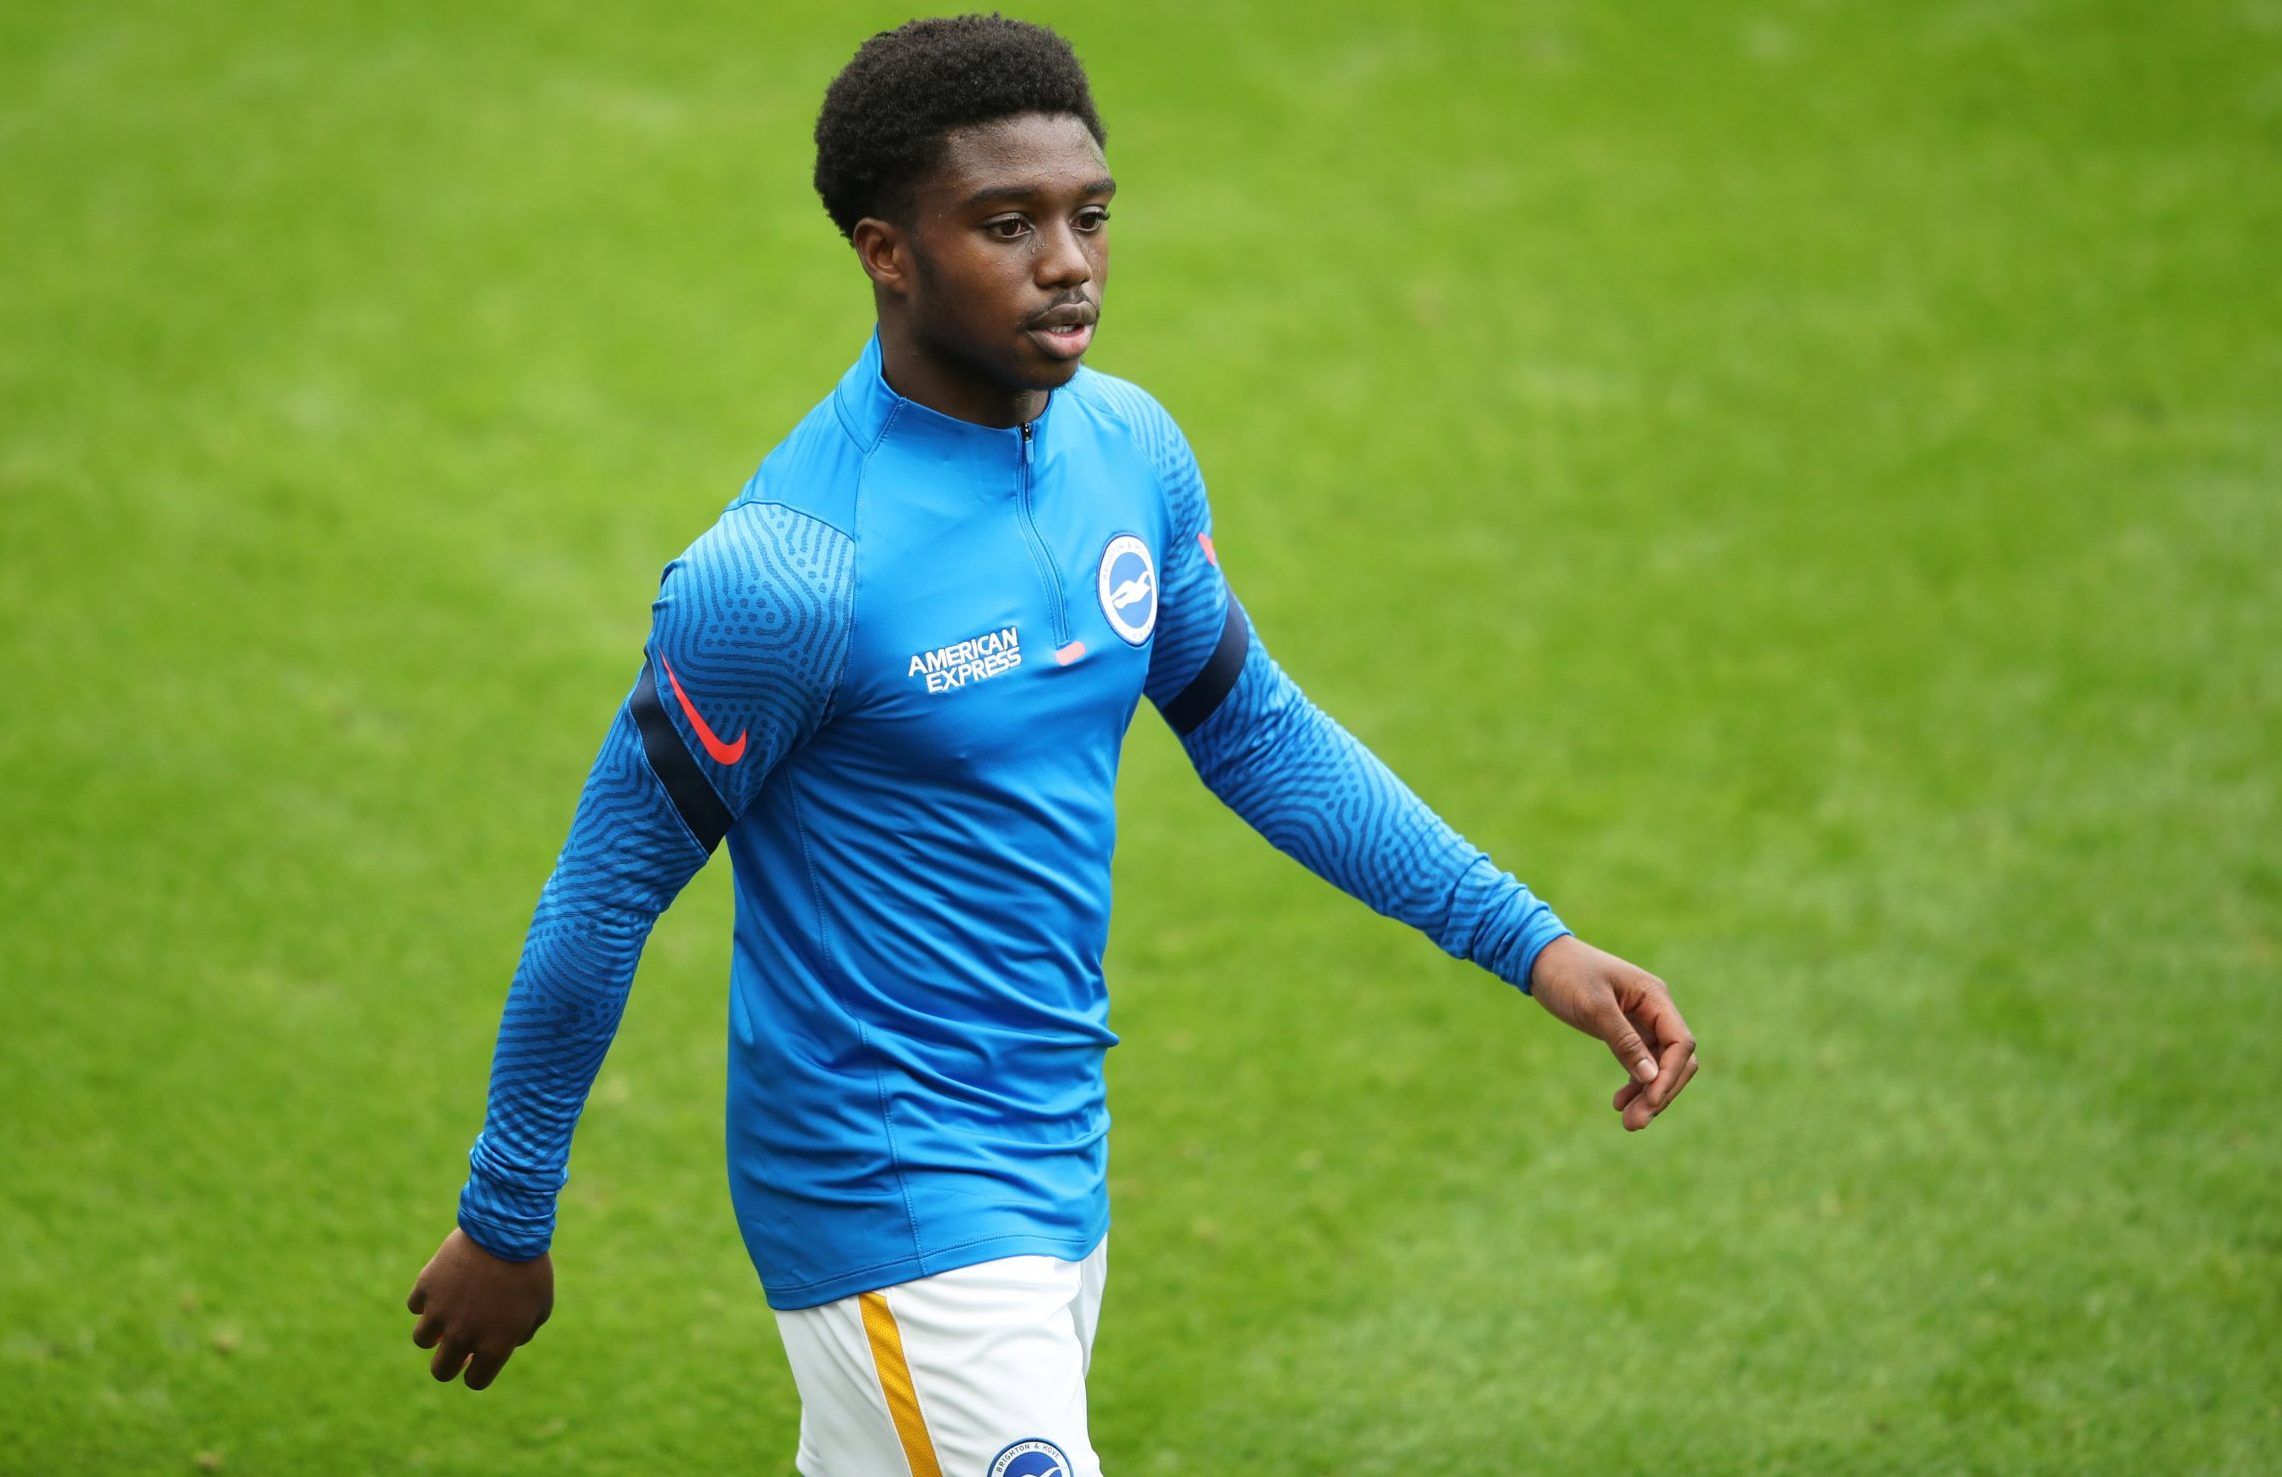 brighton defender tariq lamptey during warm up against newcastle in the premier league